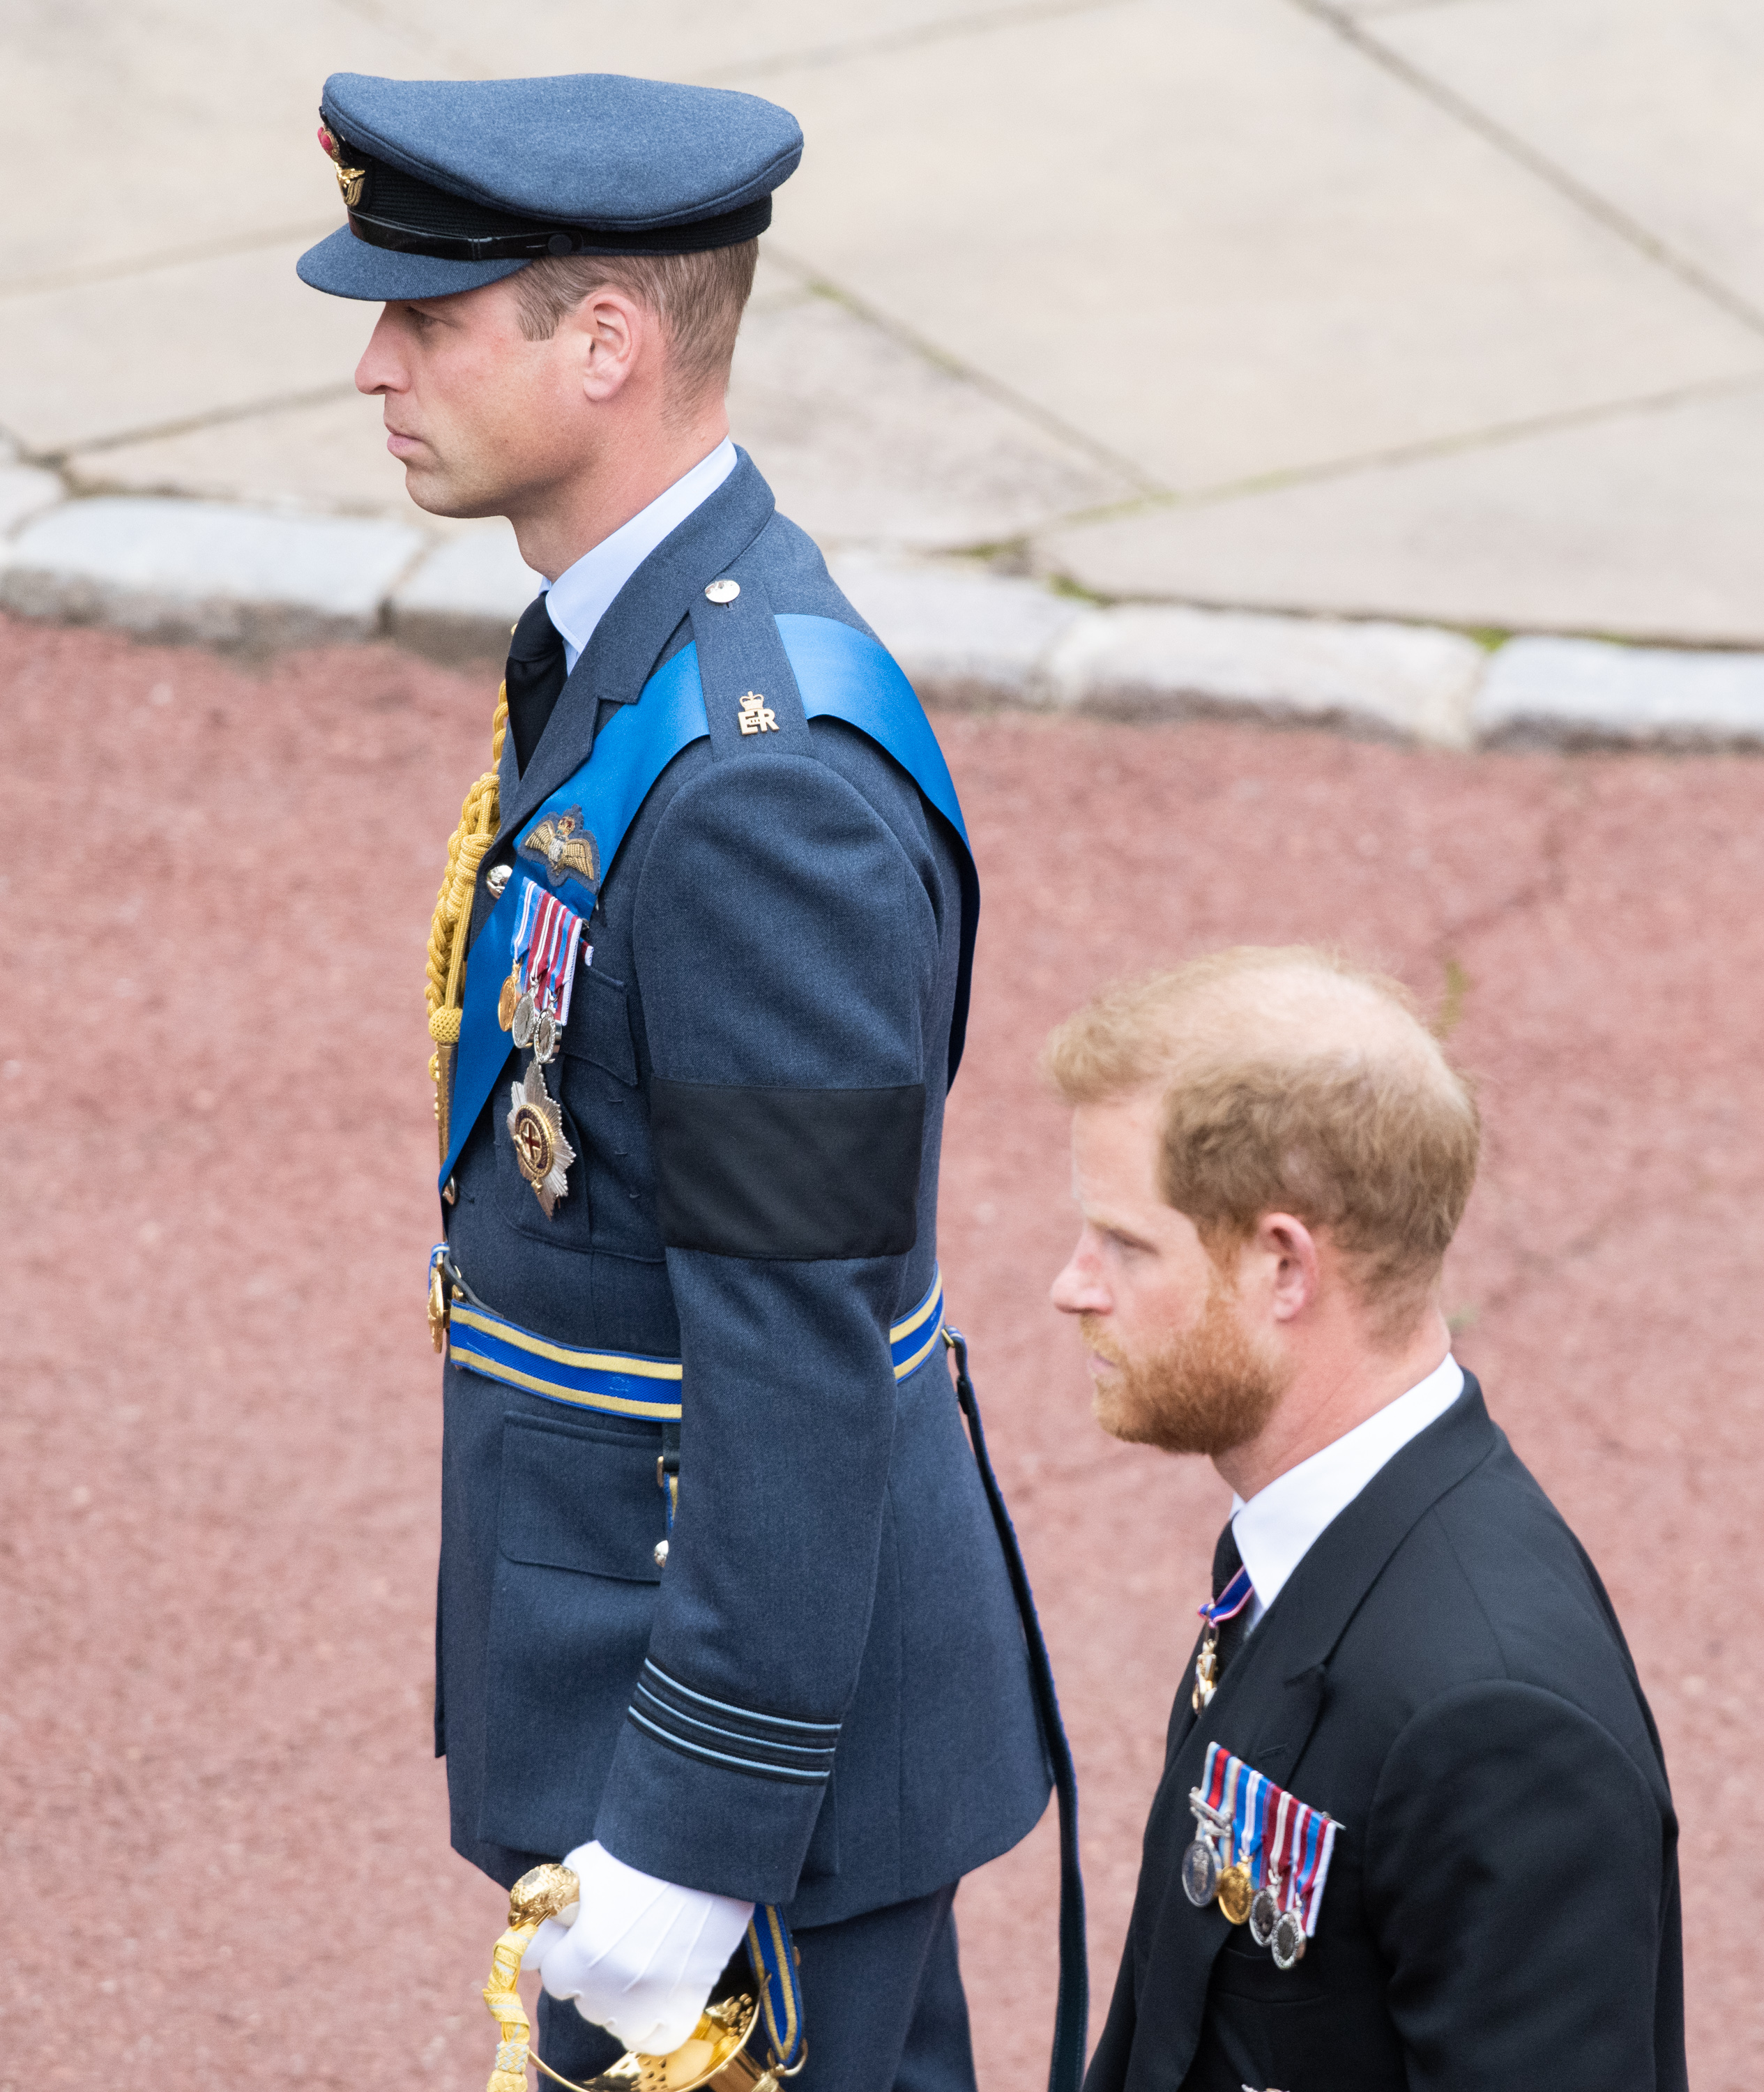 Prince William and Prince Harry during the Committal Service for Her Majesty Queen Elizabeth II in Windsor, England on September 19, 2022 | Source: Getty Images